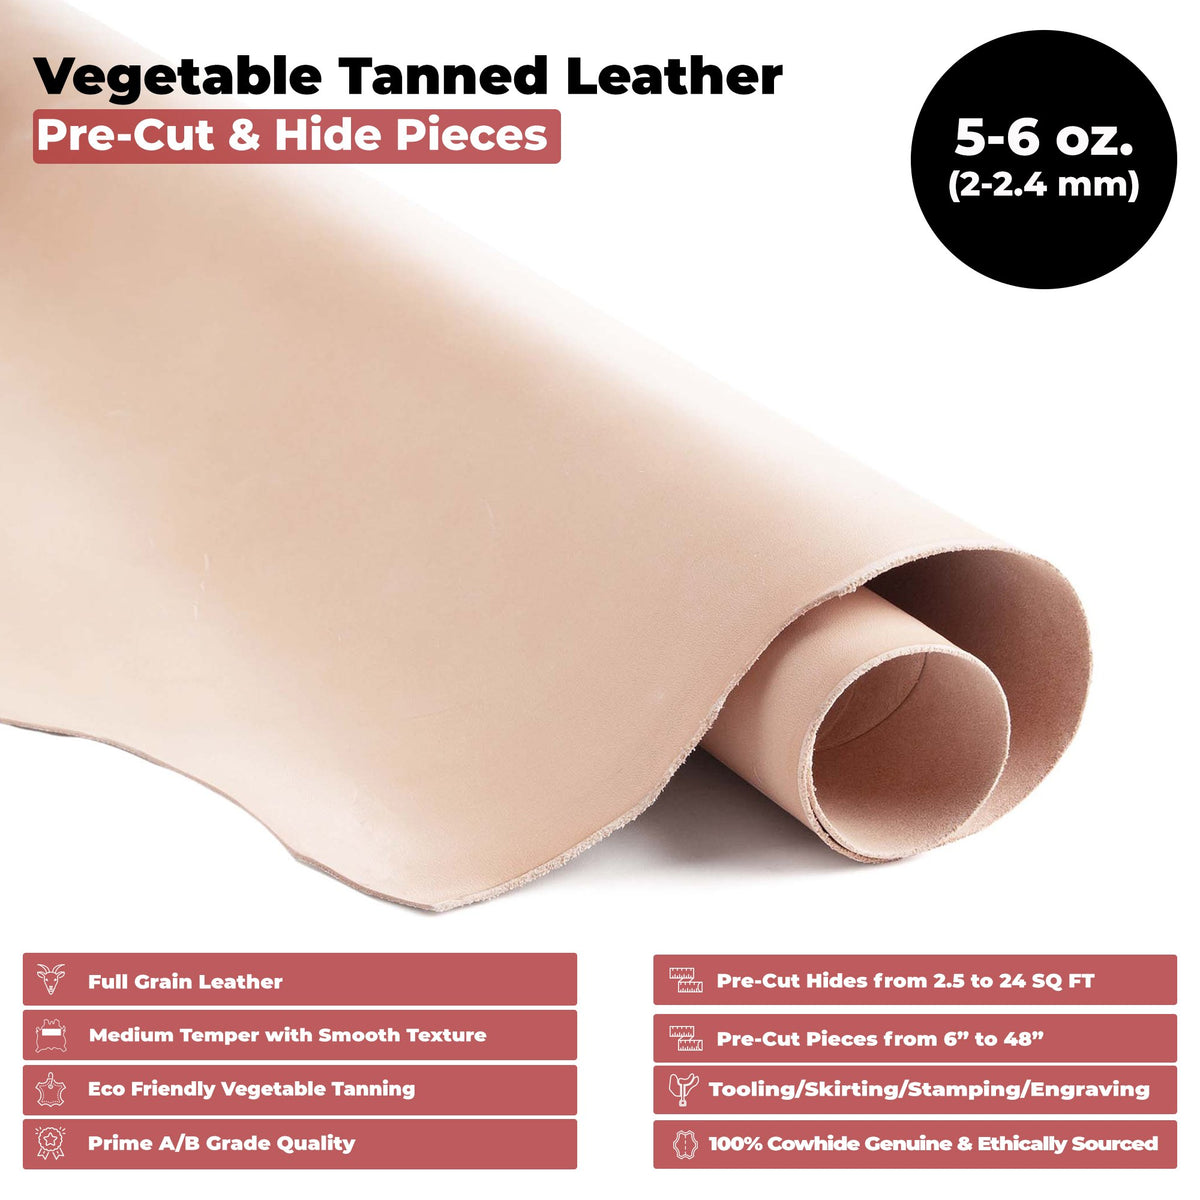 European Leather Work 5-6 oz. (2-2.4mm) Vegetable Tanned Leather Natural